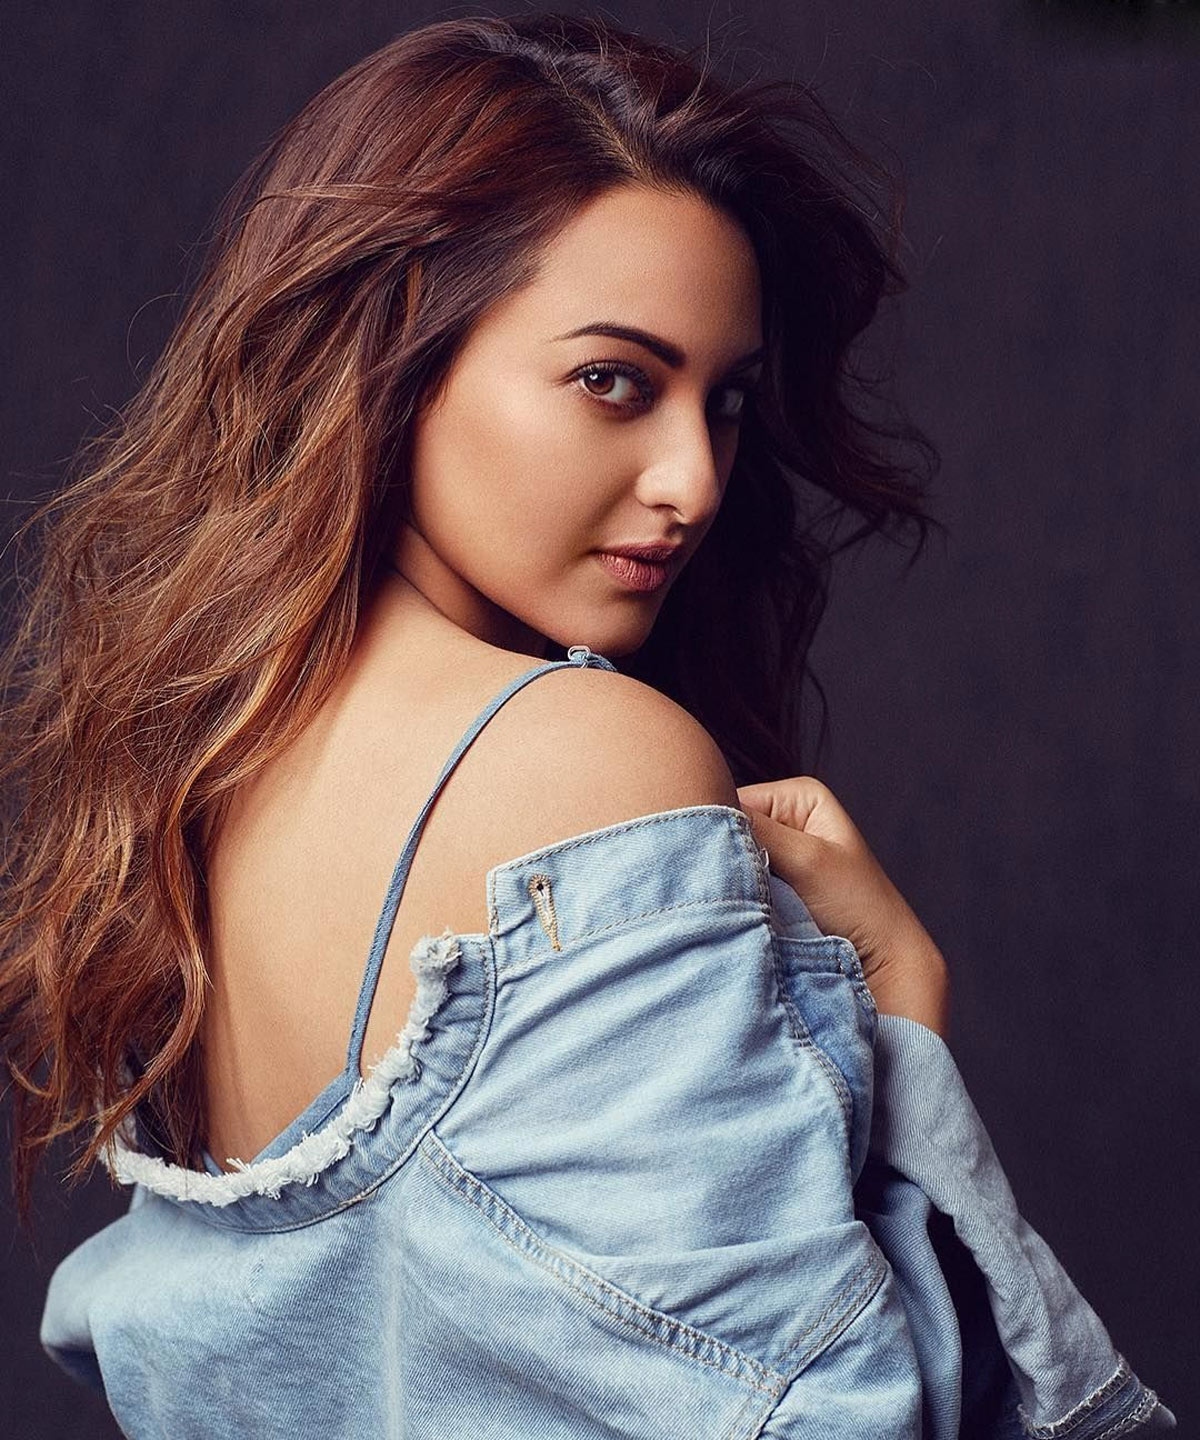 Non Bailable Warrant Issued Against Bollywood Actress Sonakshi Sinha Tamil News